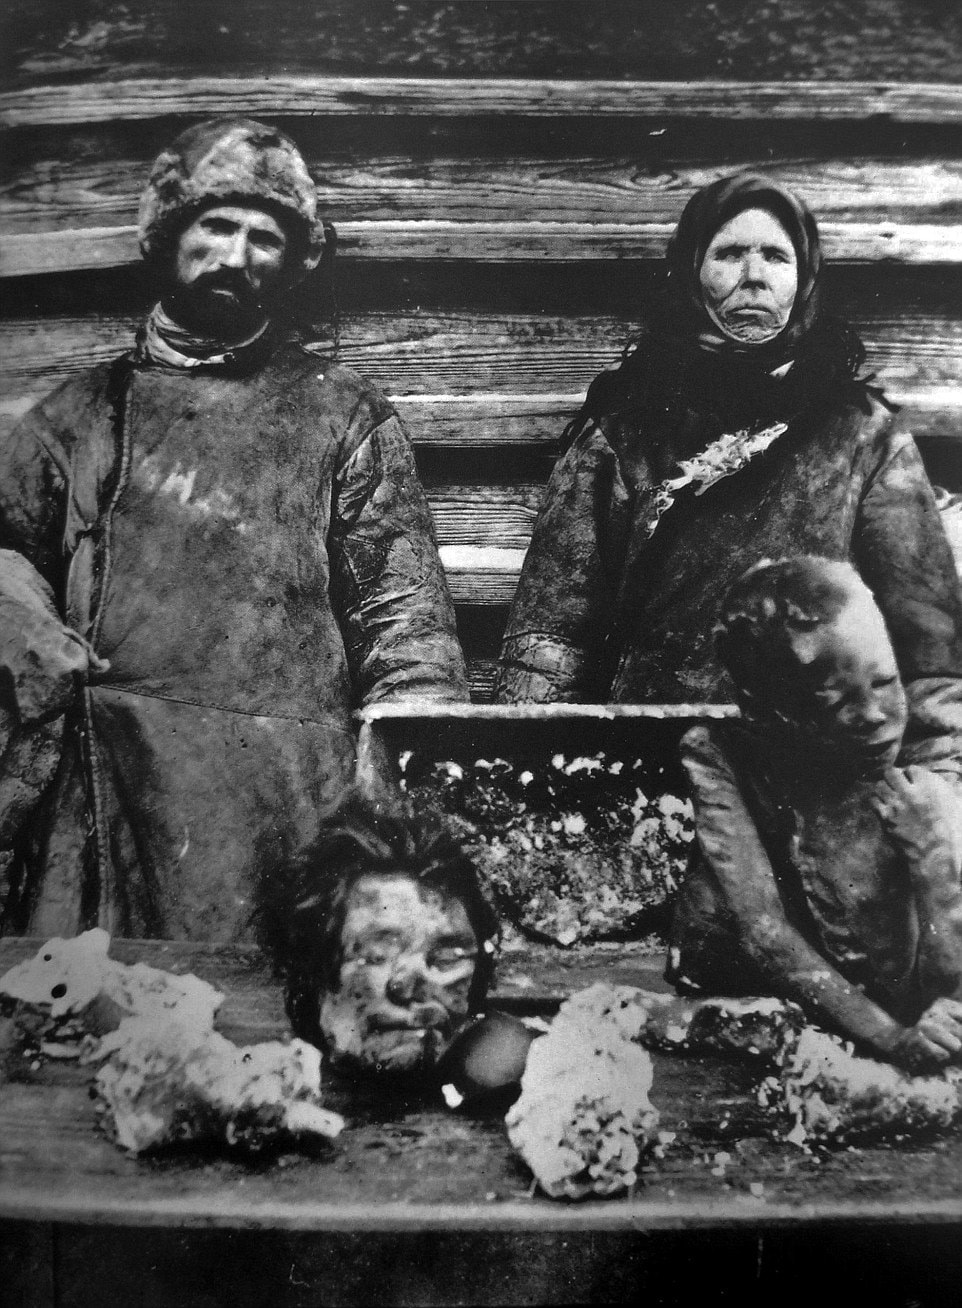 Russia Famine Photo: Cannibalism